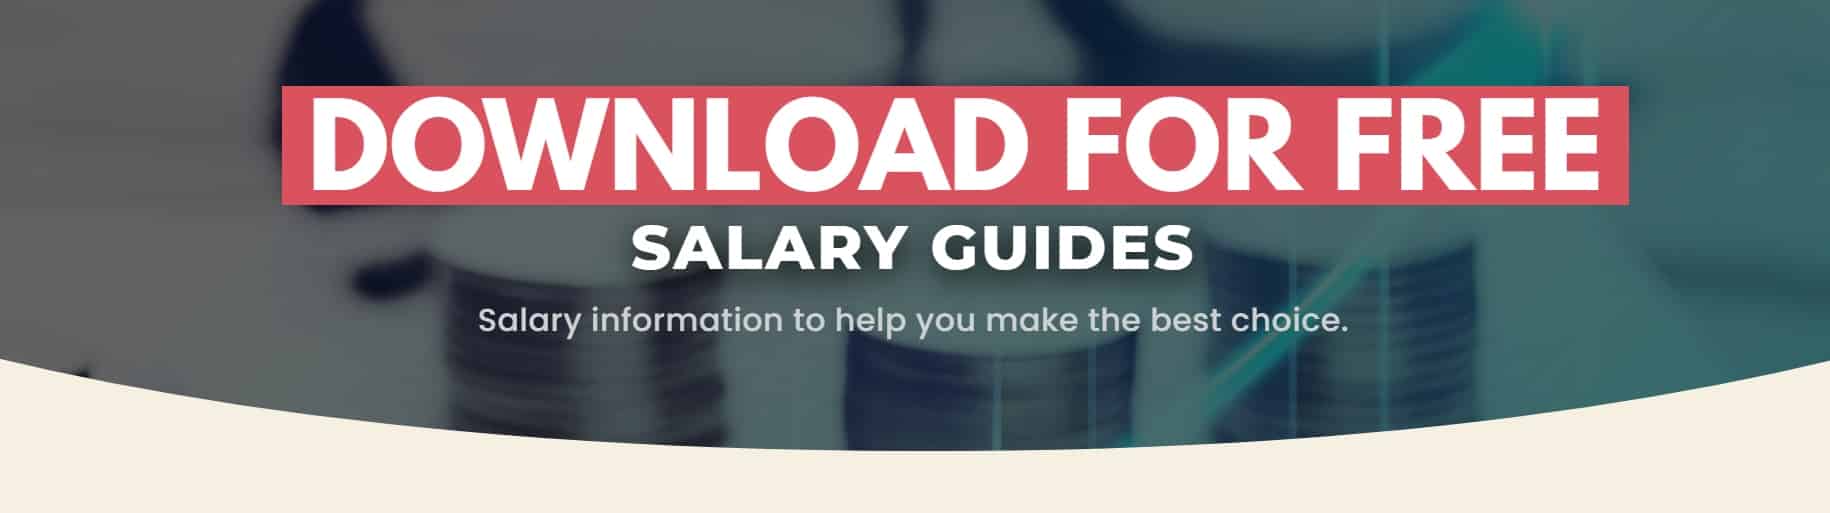 Opti Salary Guide Banner Salary Guides for 2022 1